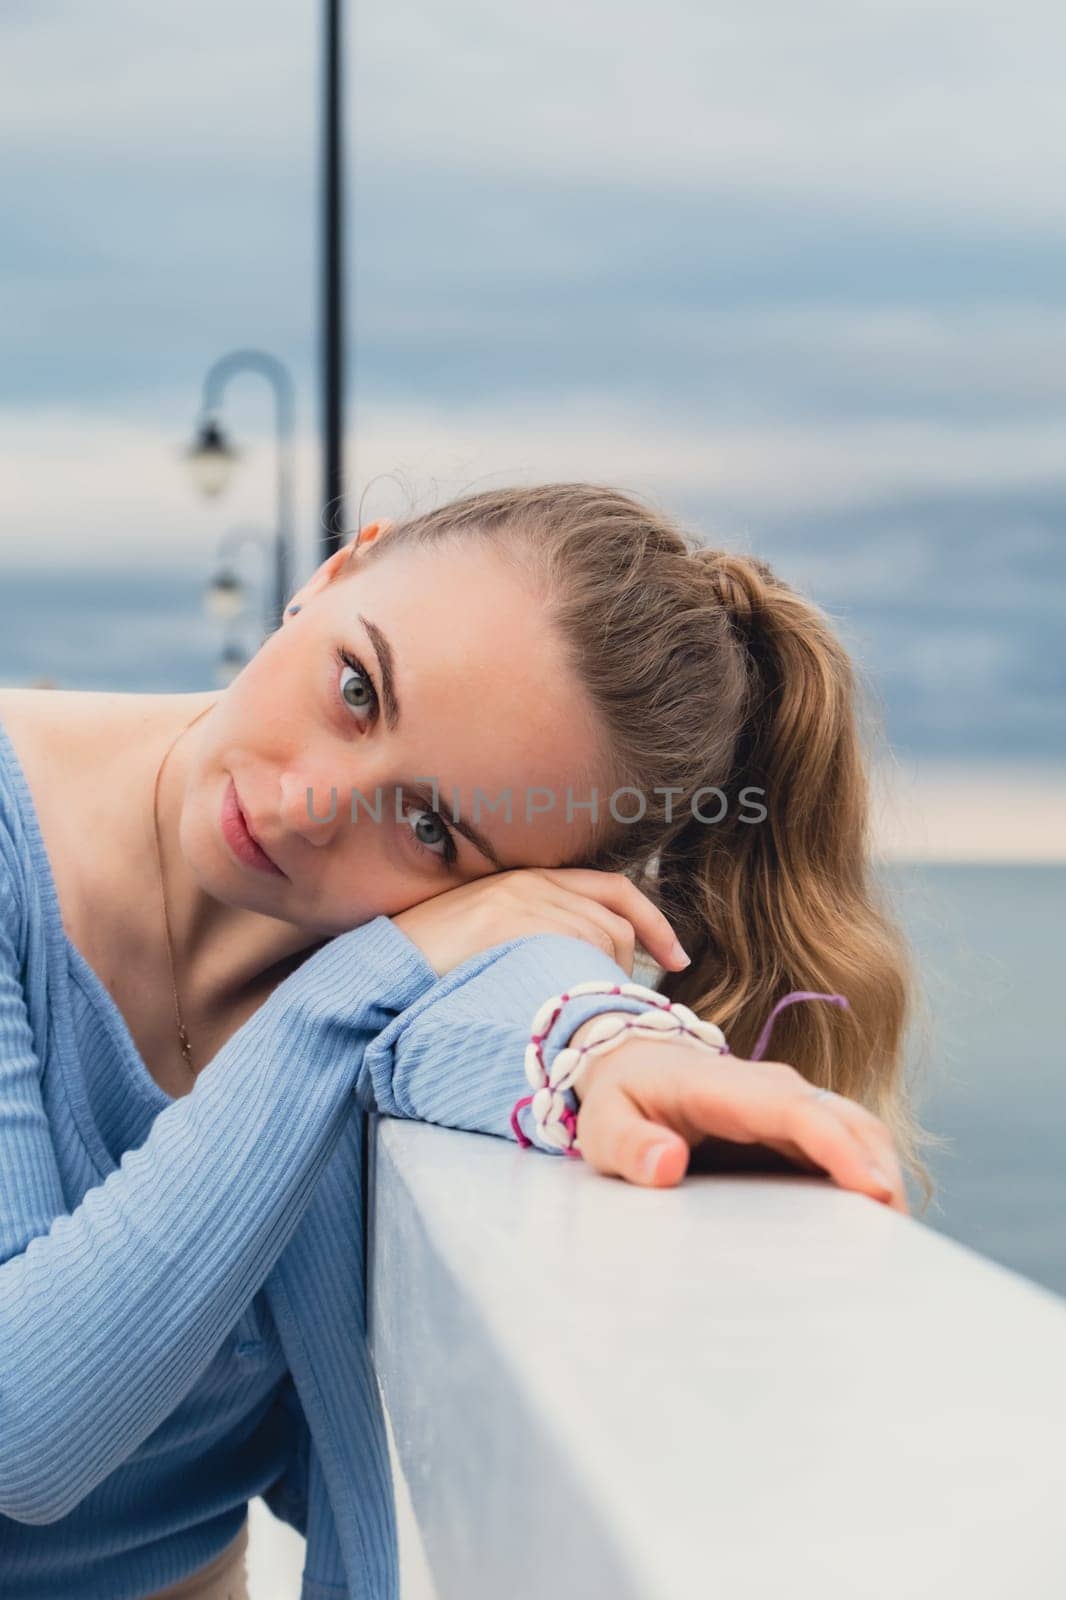 Young woman standing on wooden pier blurred beachside background. Attractive female enjoying the sea shore travel and active lifestyle concept. Springtime. Wellness wellbeing mental health inner peace Slow life digital detox